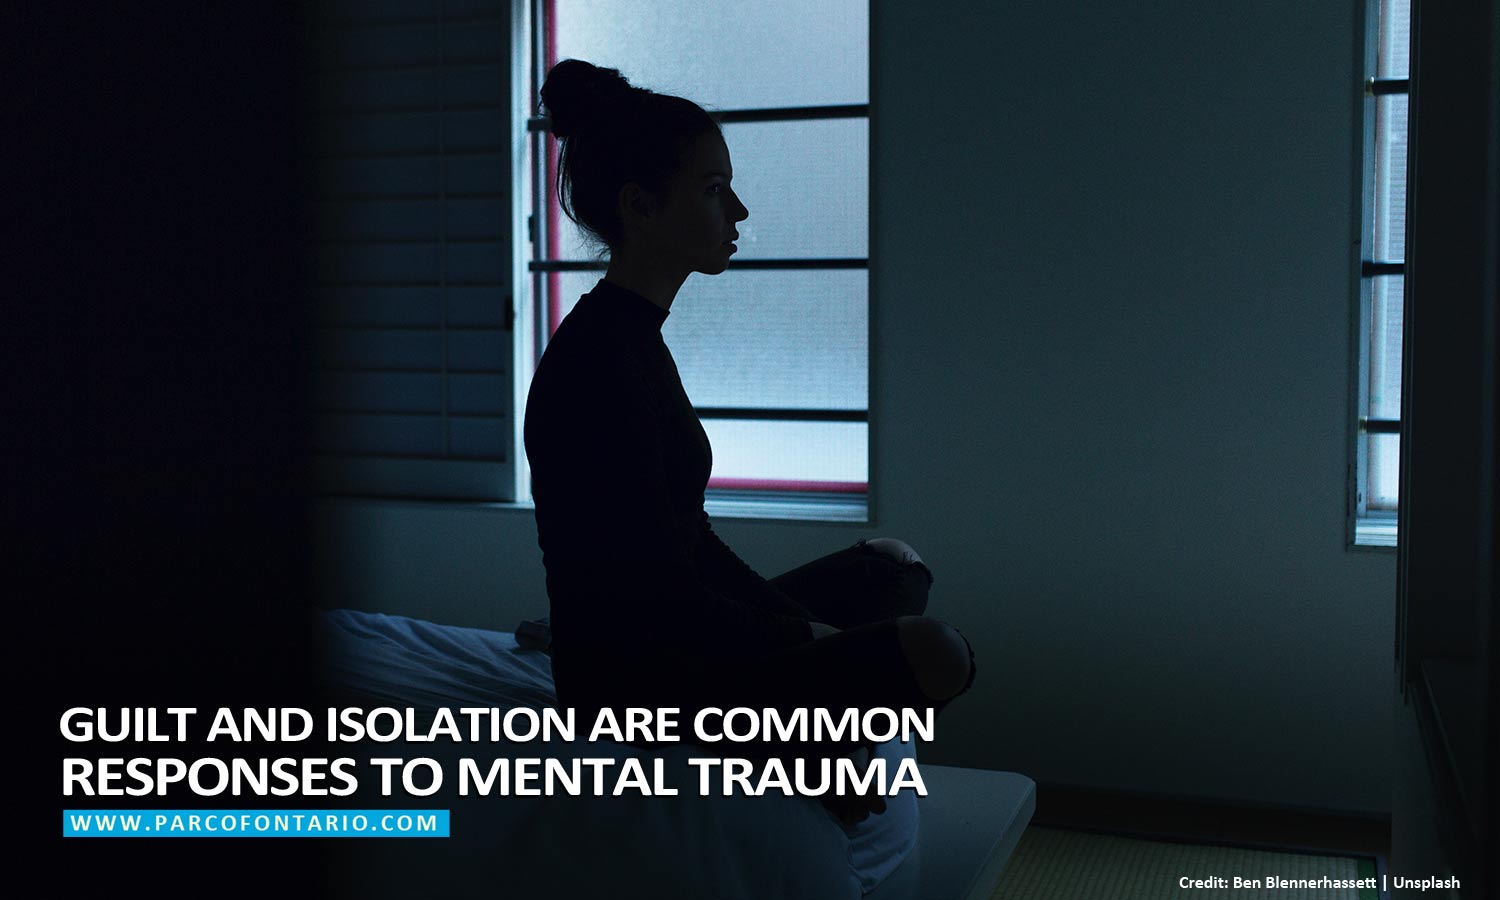 Guilt and isolation are common responses to mental trauma